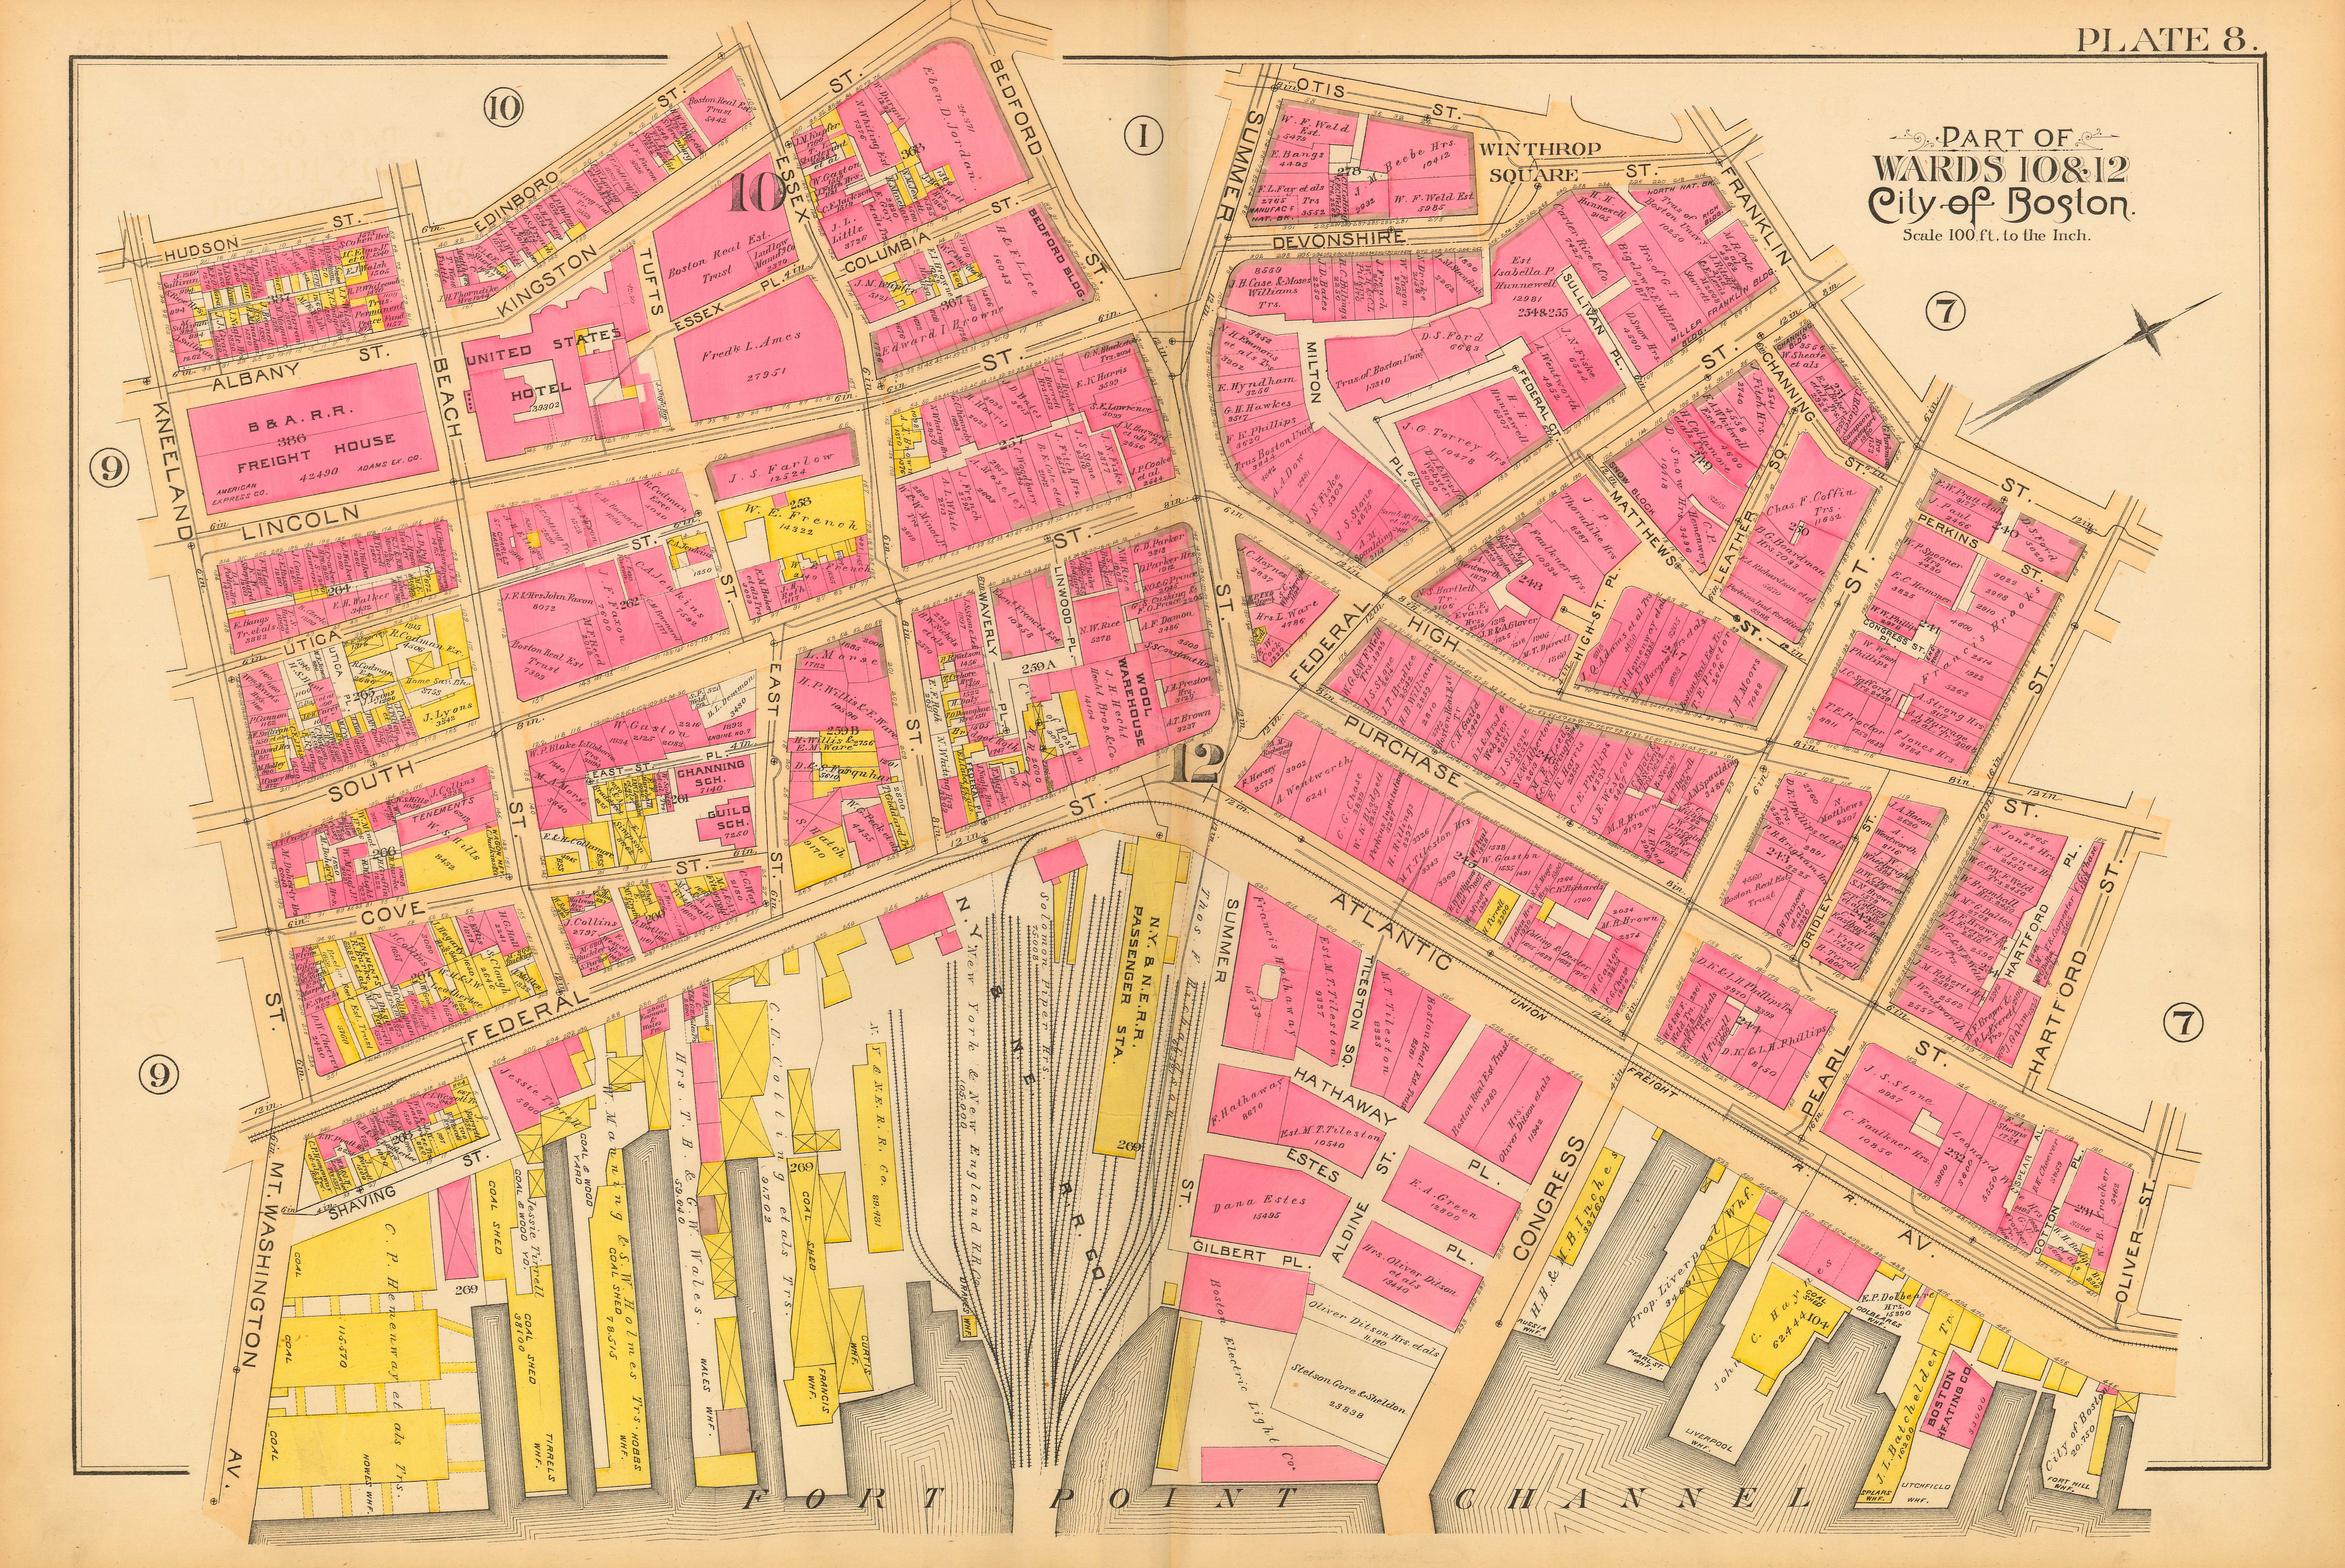 Image of “Plate 8” from “Atlas of the City of Boston: City Proper and Roxbury”